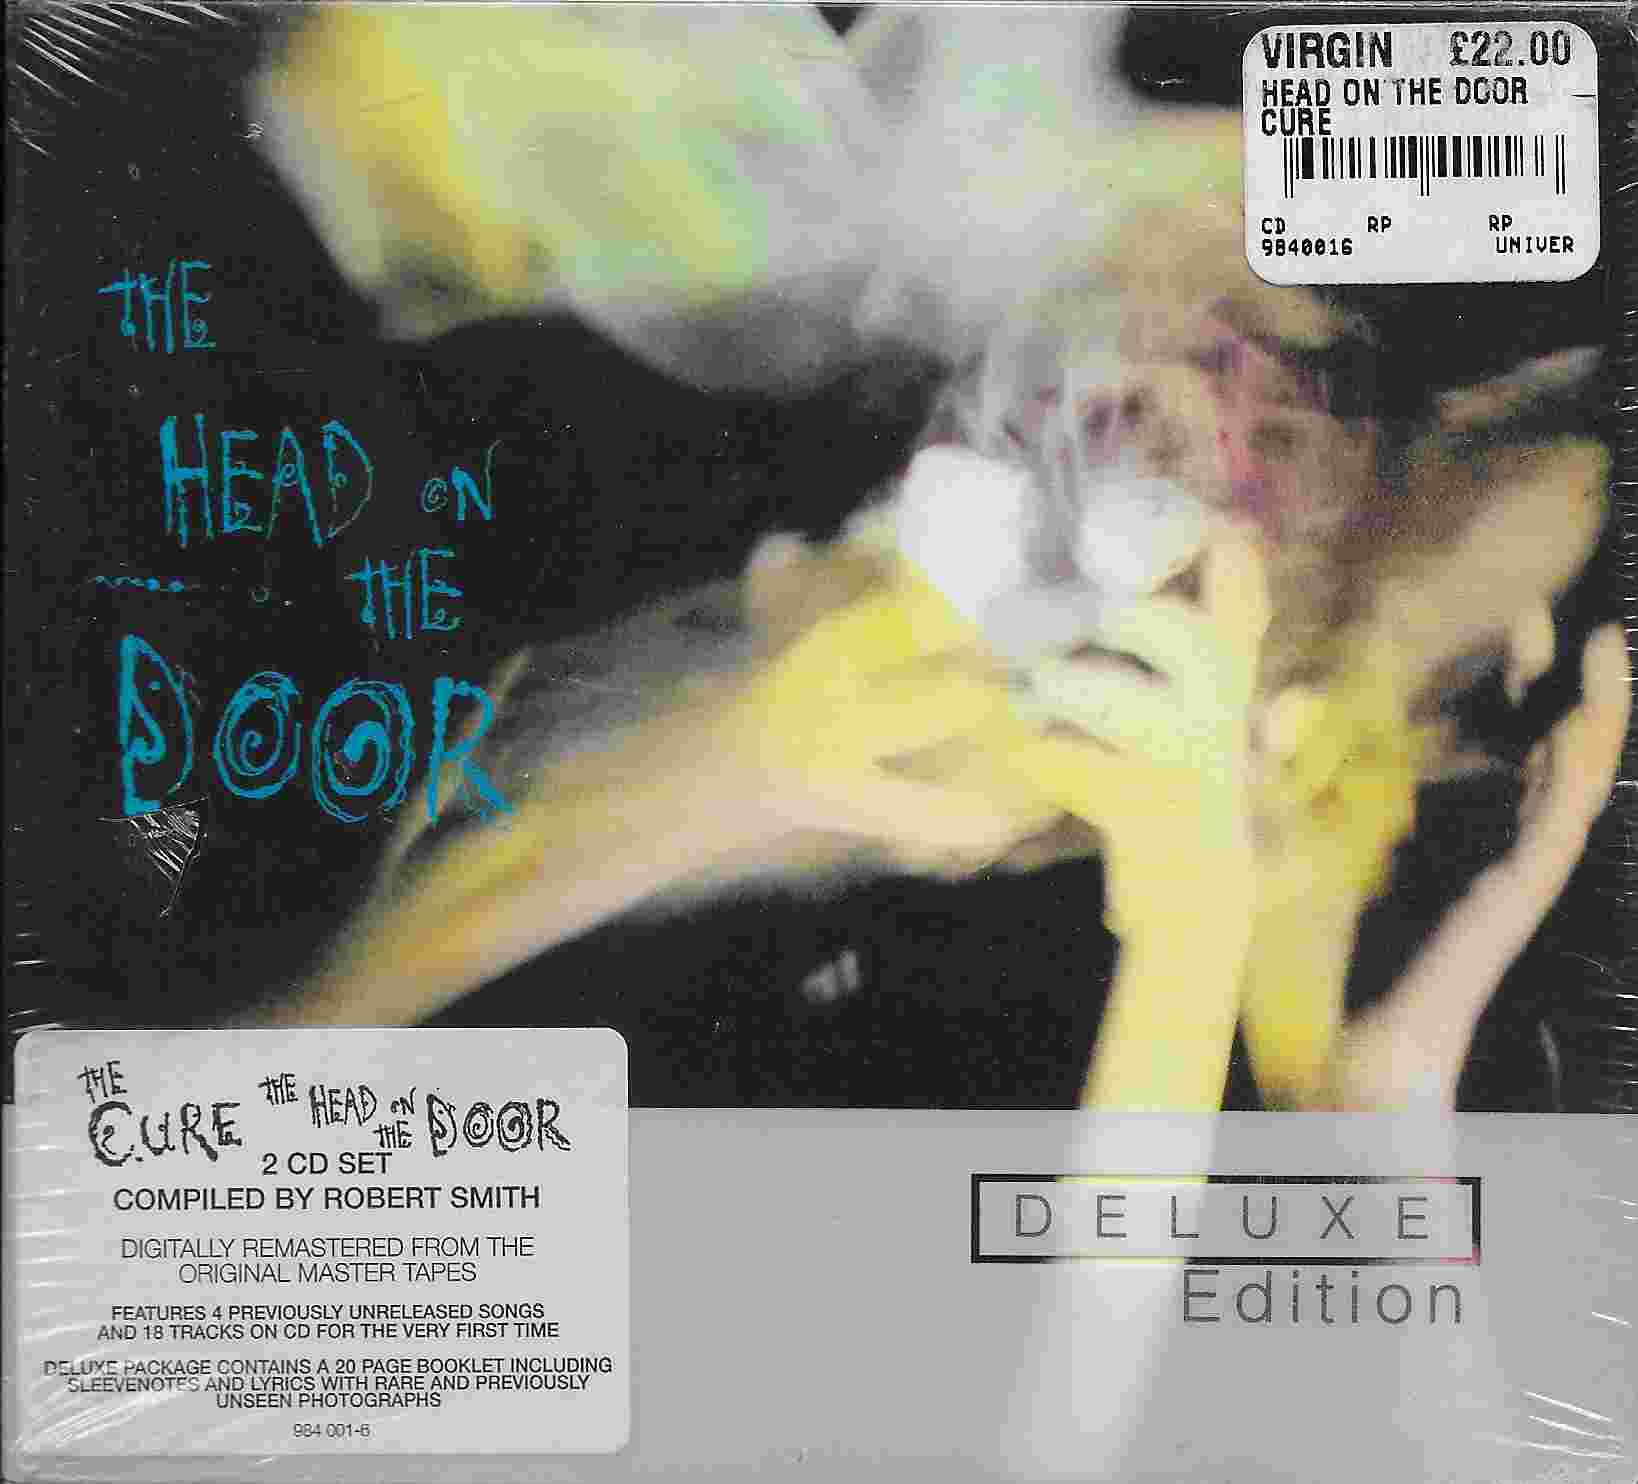 Picture of 984001 - 6 The head on the door - Deluxe edition by artist The Cure